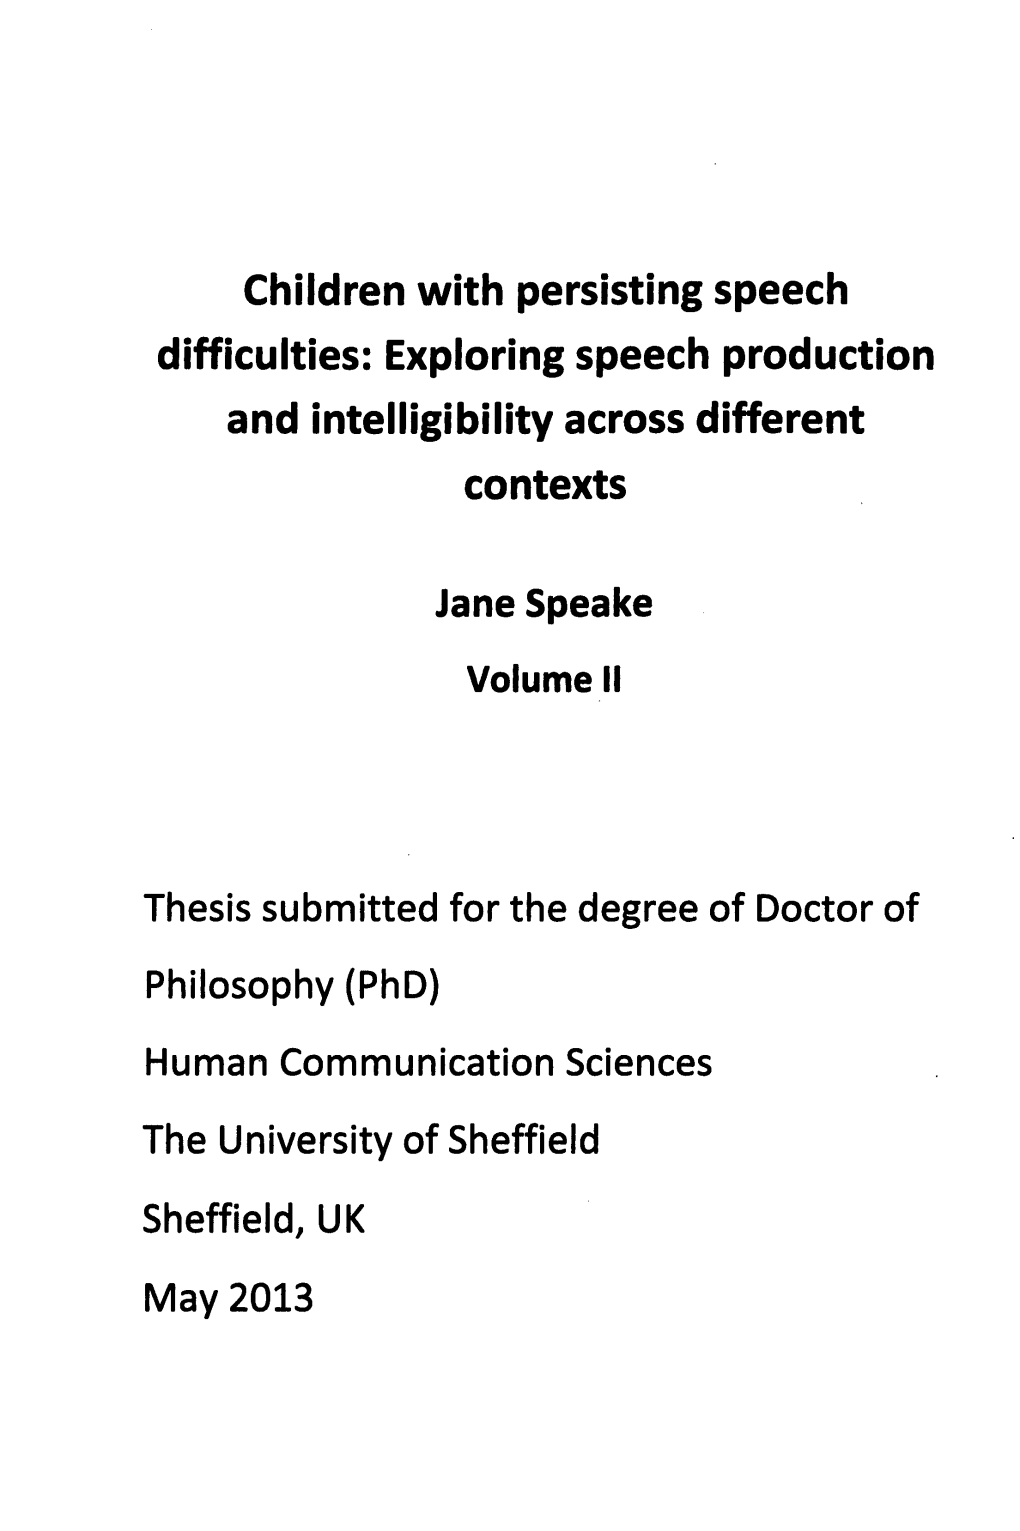 Children with Persisting Speech Difficulties: Exploring Speech Production and Intelligibility Across Different Contexts